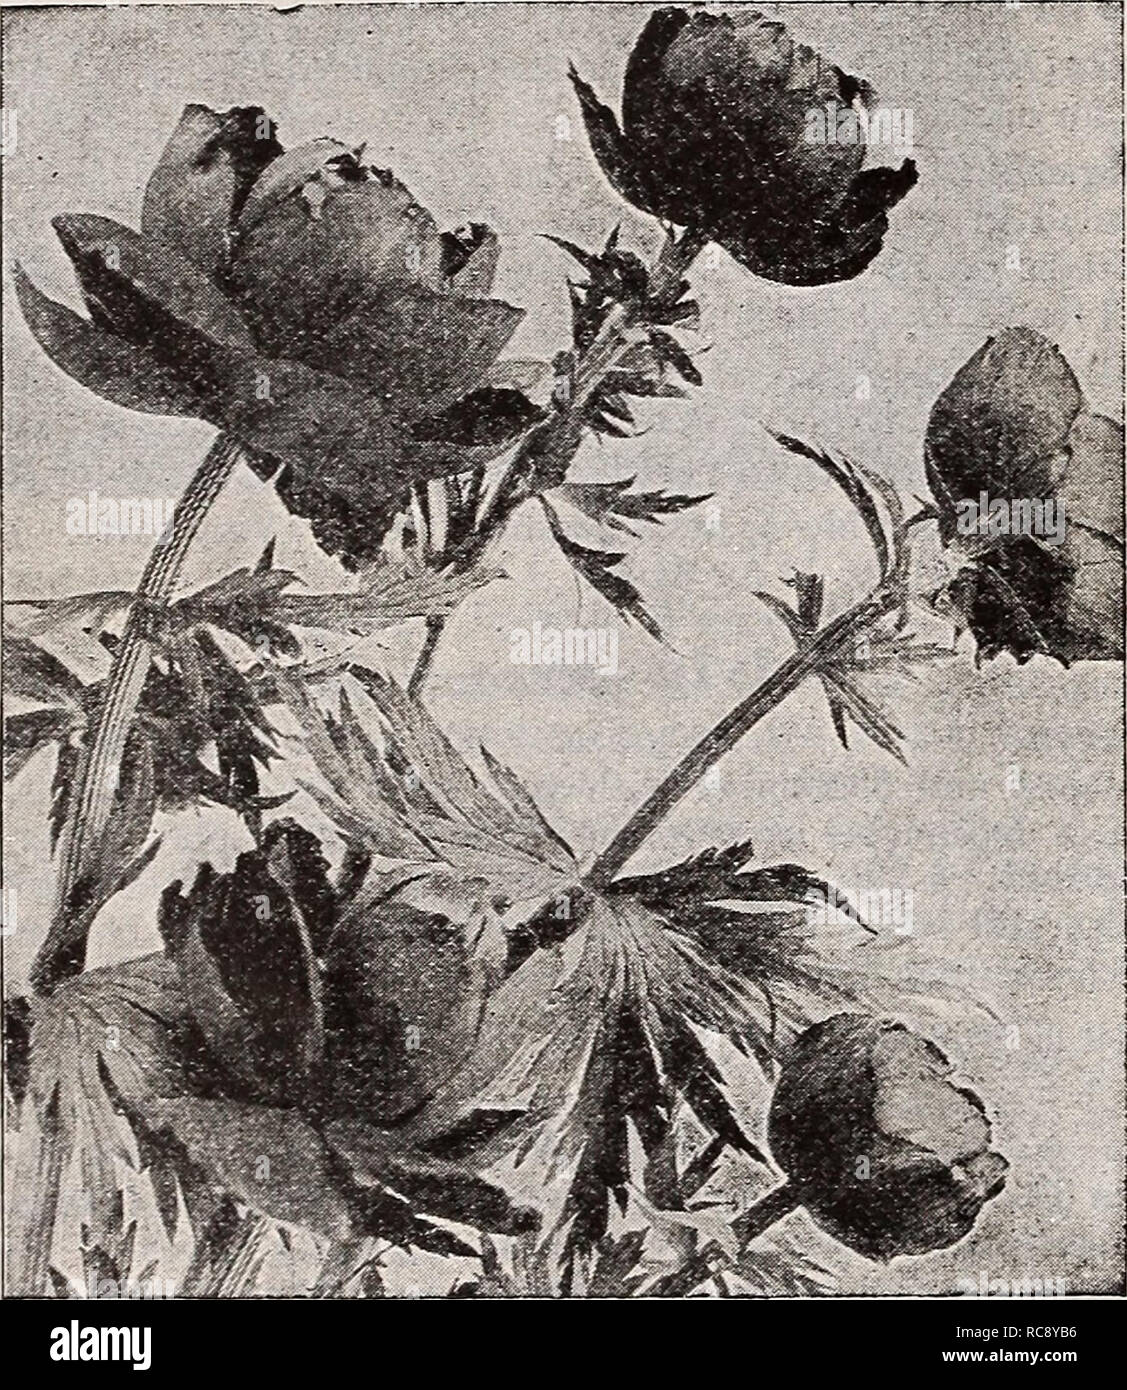 . Dreer's bulbs plants, shrubs and seeds for fall planting : autumn 1937. Bulbs (Plants) Catalogs; Flowers Seeds Catalogs; Gardening Equipment and supplies Catalogs; Nurseries (Horticulture) Catalogs; Vegetables Seeds Catalogs. Dreer Quality HARDY PERENNIAL PLANTS for Fall Planting Spiraea—Goat's Beard, Meadow Sweet ® Pilipendula (Dropwort). 12-15 in. Masses of foamy white flowers borne profusely during June and July. Has pretty, fern-like foliage. — fl. pi. The showy double-flowering form. Palmata elegans. 3 ft. Deep purple-red stems and showy silvery pink flowers. June-July. Ulmaria fl. pi.  Stock Photo